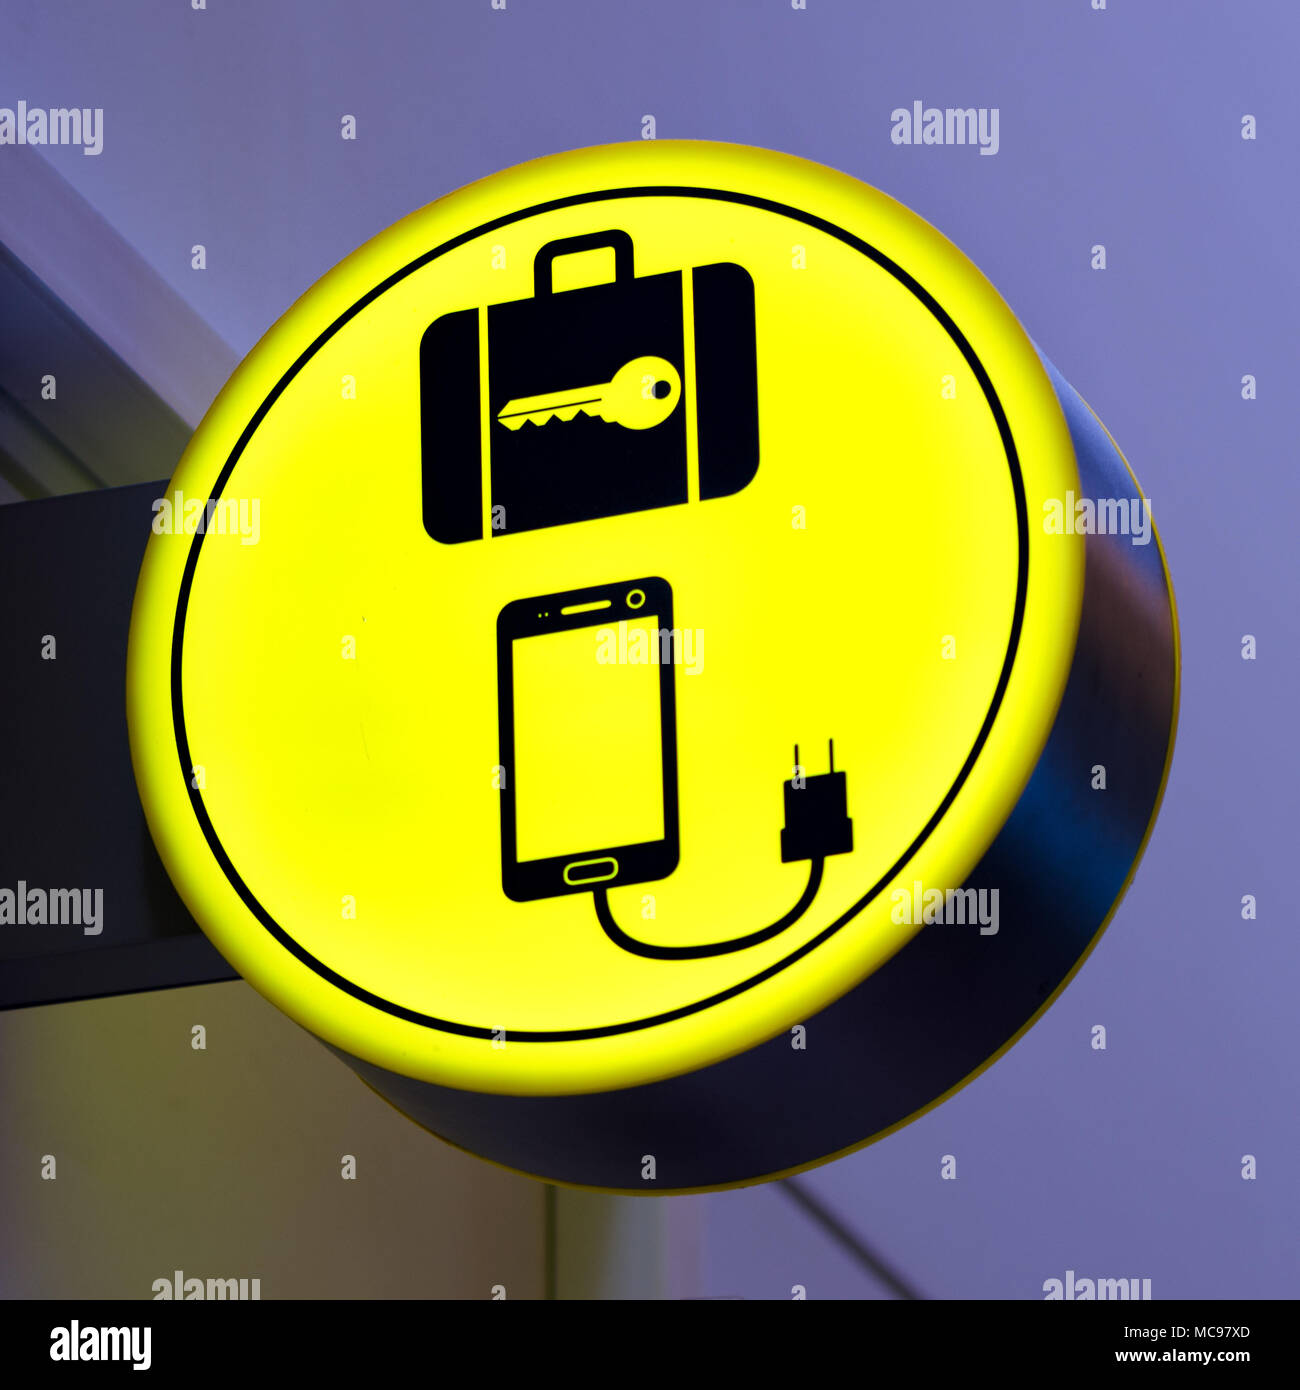 Charging mobile, cellphone battery icon in public area, airport. Locker luggage sign. Copy space Stock Photo